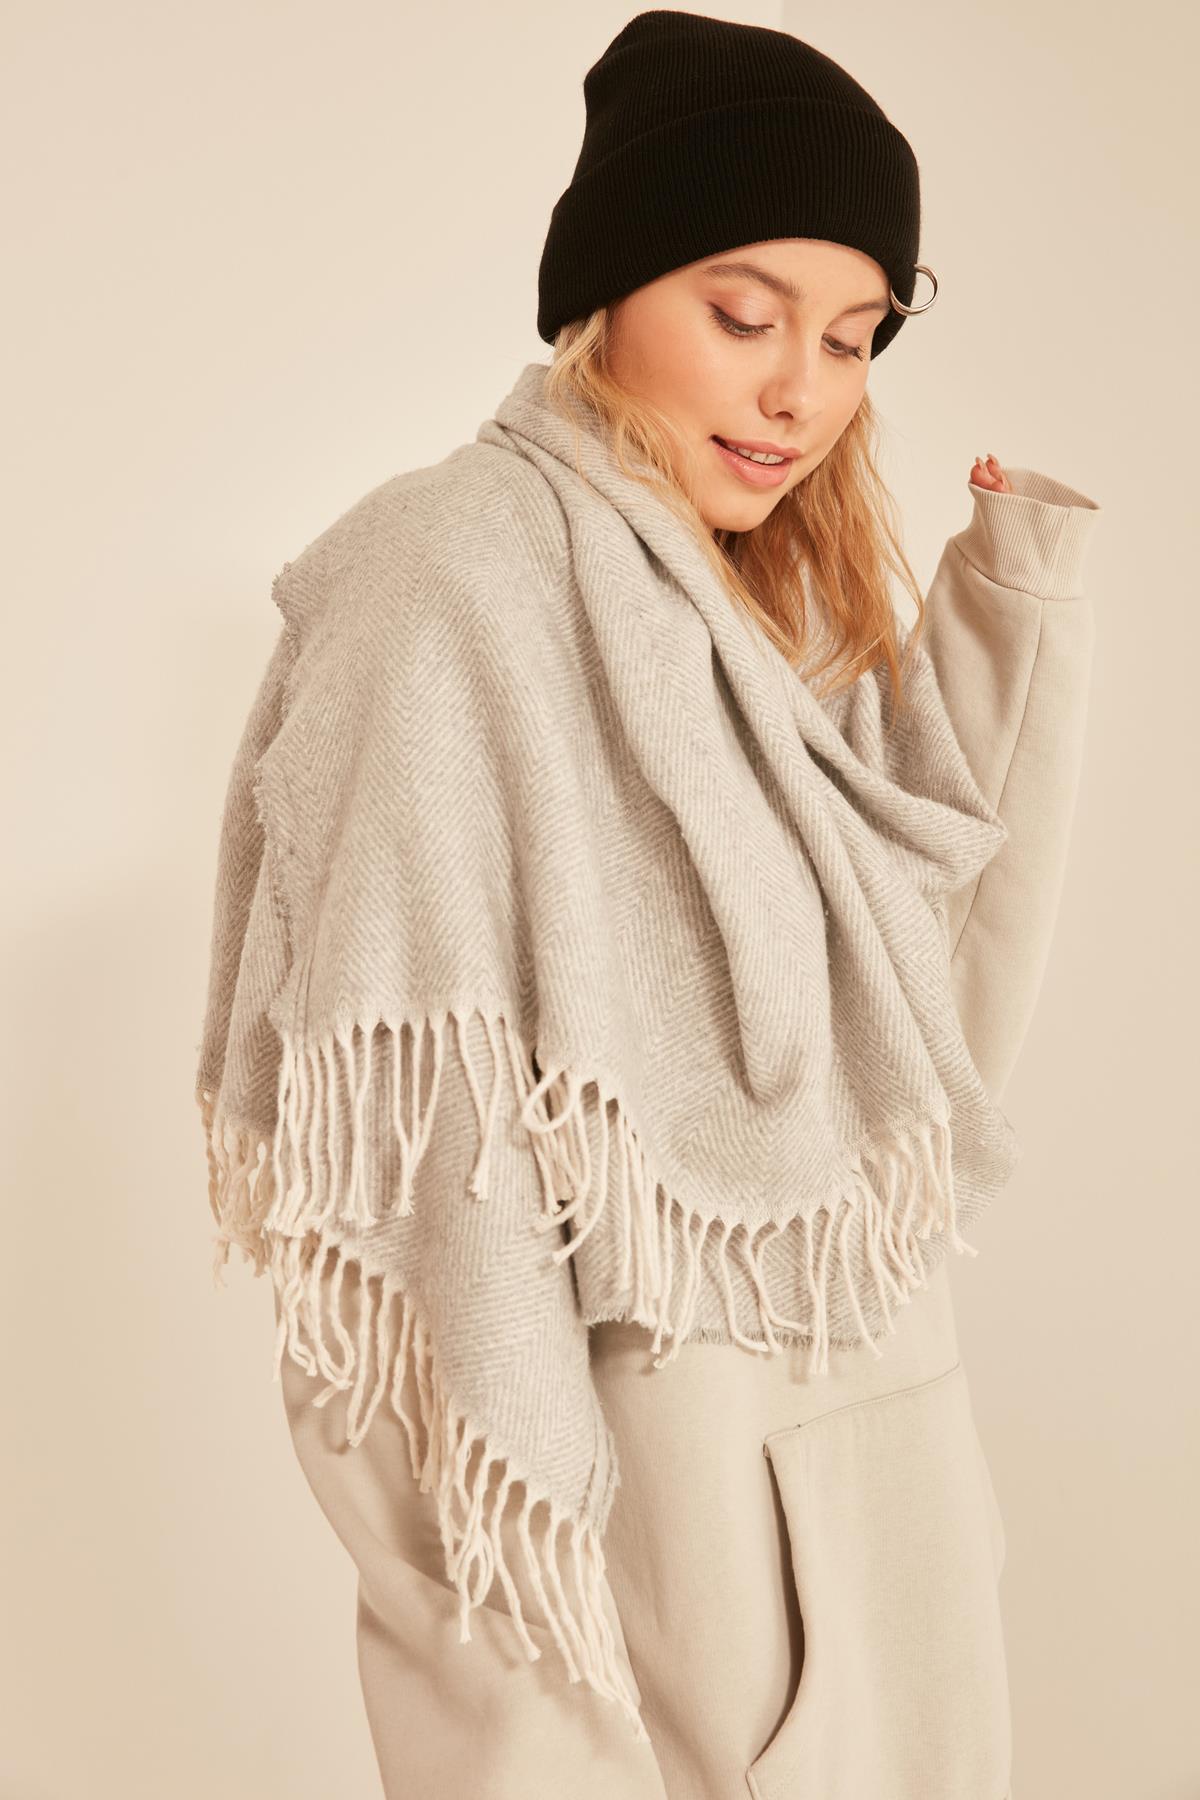 A model wears NSV10832 - Soft Textured Tassels Light Thick Shoulder Shawl - Gray, wholesale Shawl of Nesvay to display at Lonca